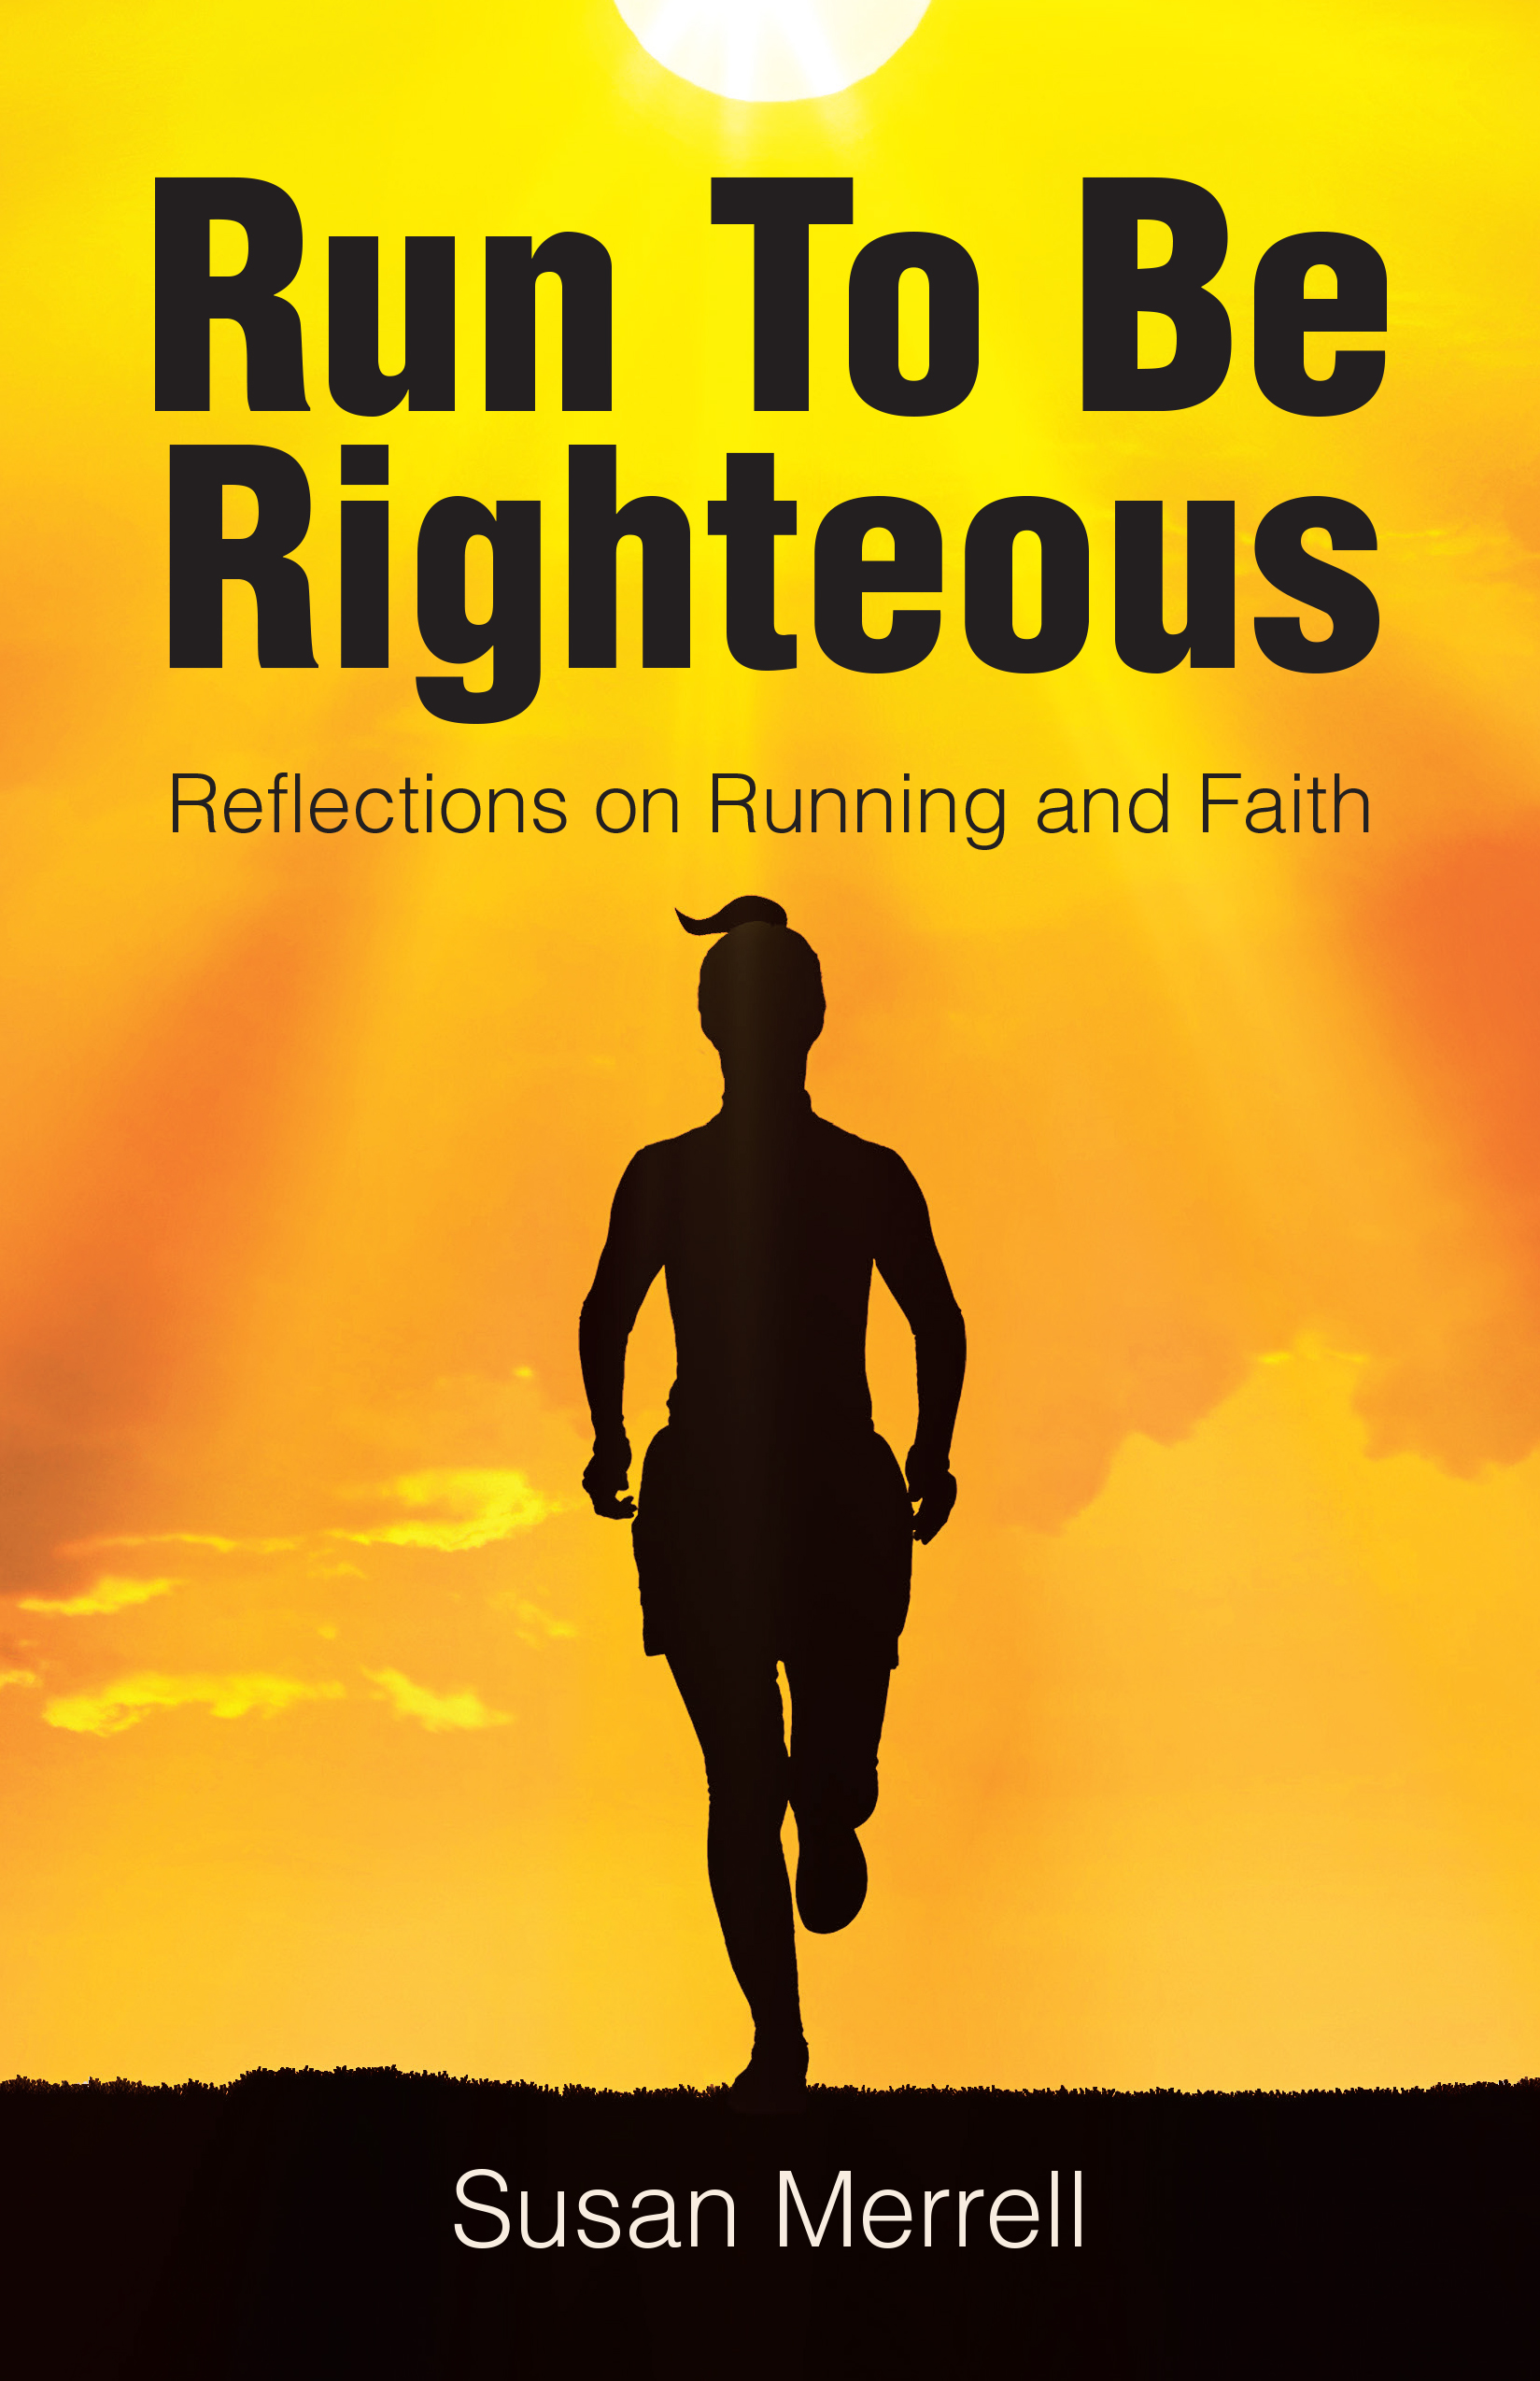 Susan Merrell’s Newly Released “Run To Be Righteous: Reflections on Running and Faith” is an Inspirational Journey of Spiritual and Physical Endurance